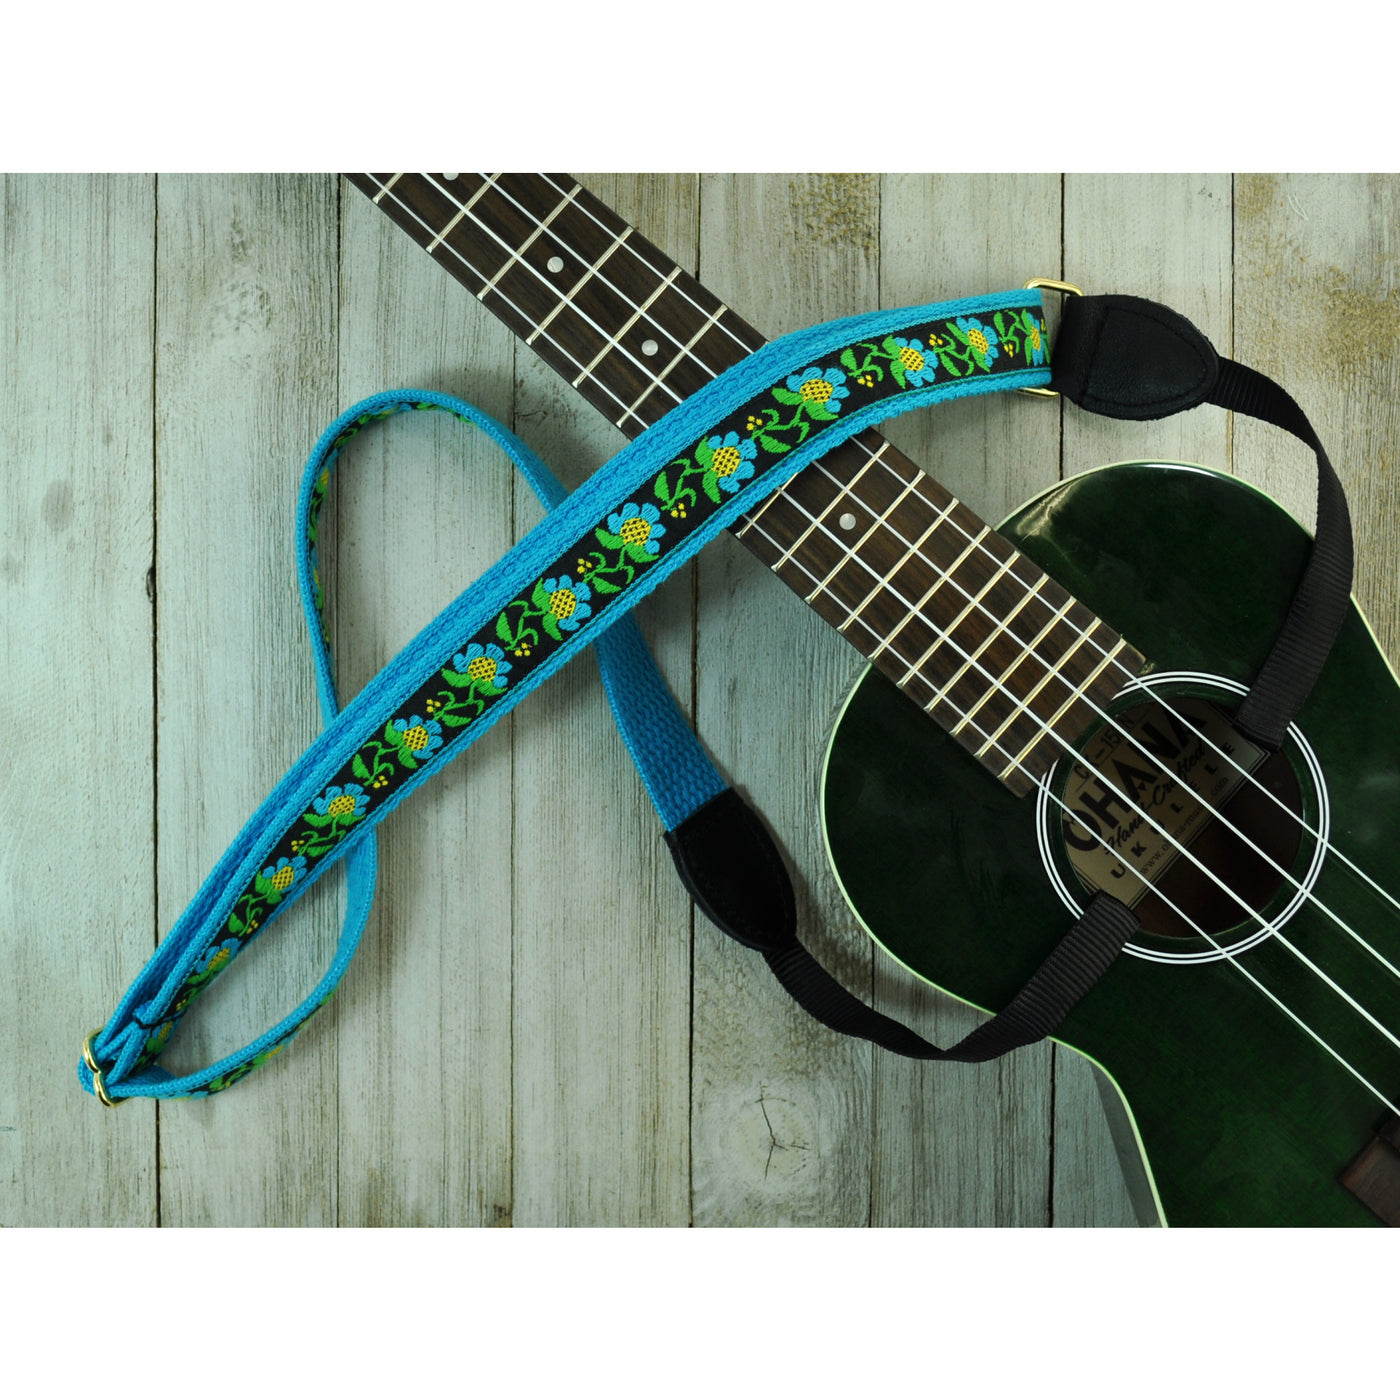 Souldier DUKA1052TQ04BK - Handmade Souldier Fabric Ukulele Straps, 1 Inch Wide and Adjustable up to 55" Made in the USA, Black